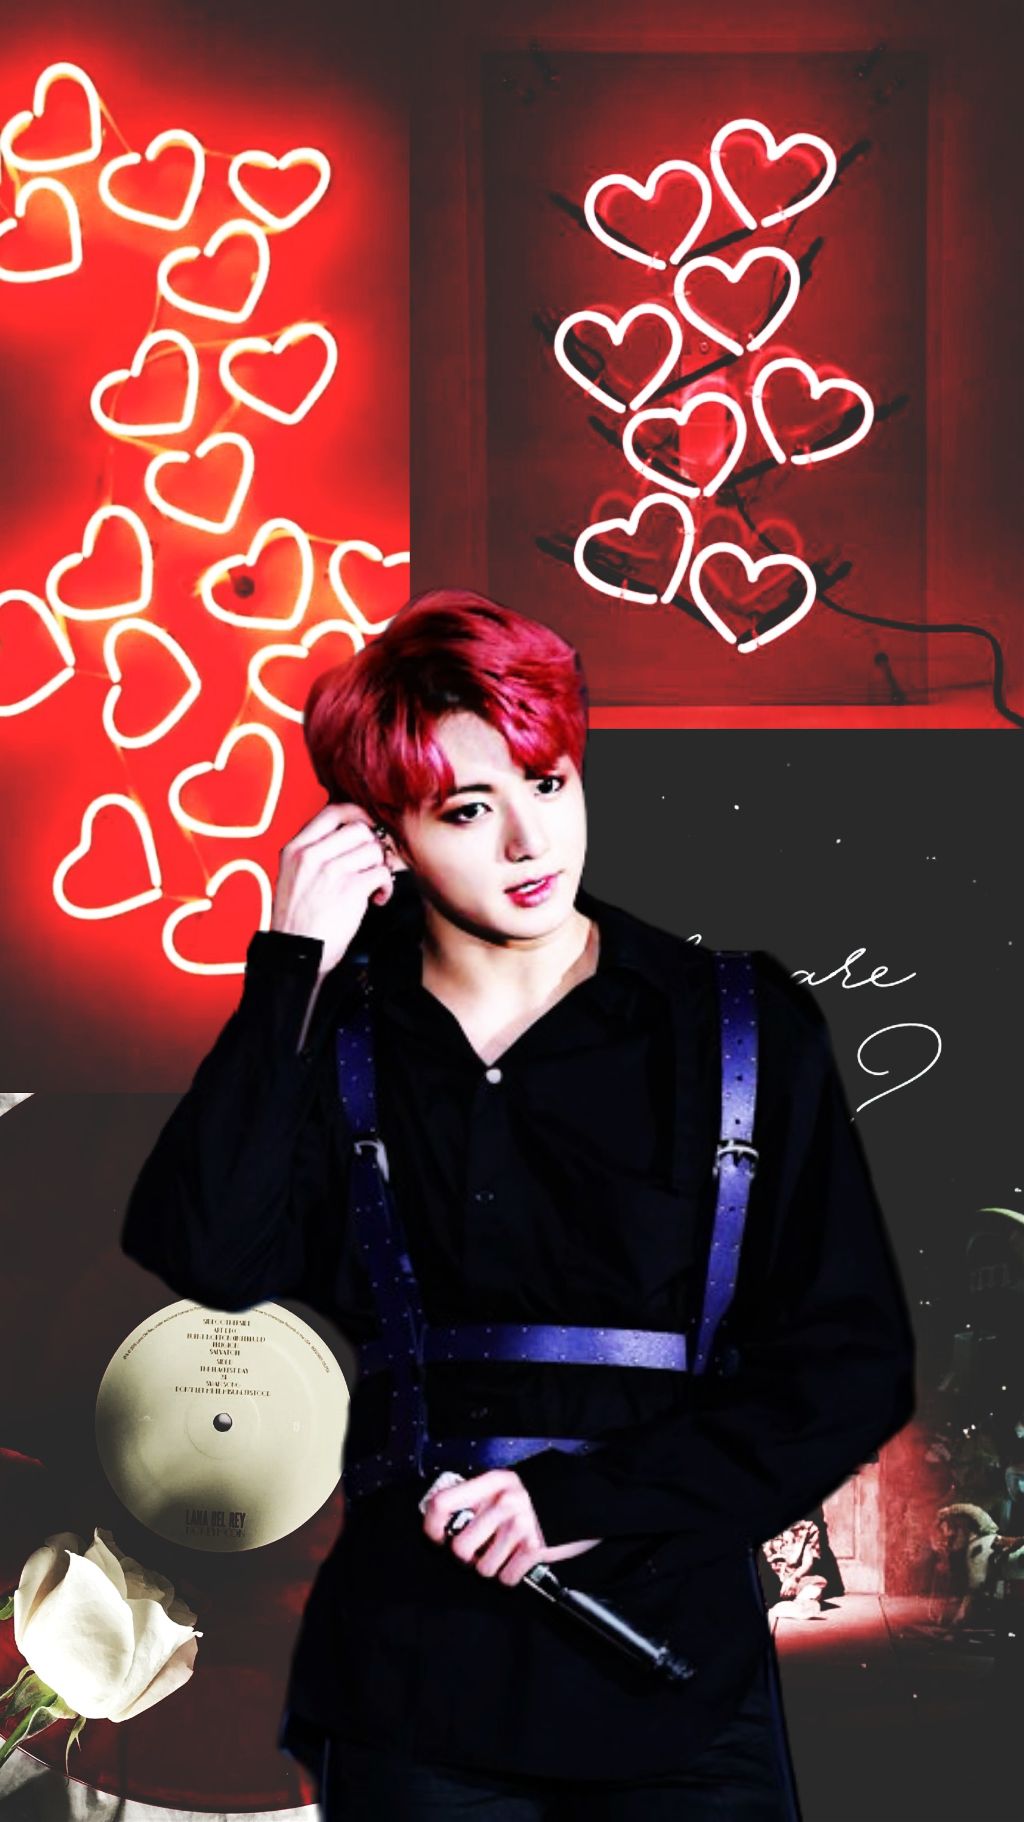 Freetoedit Jungkook Jeon Bts Bts Red Aesthetic Love You